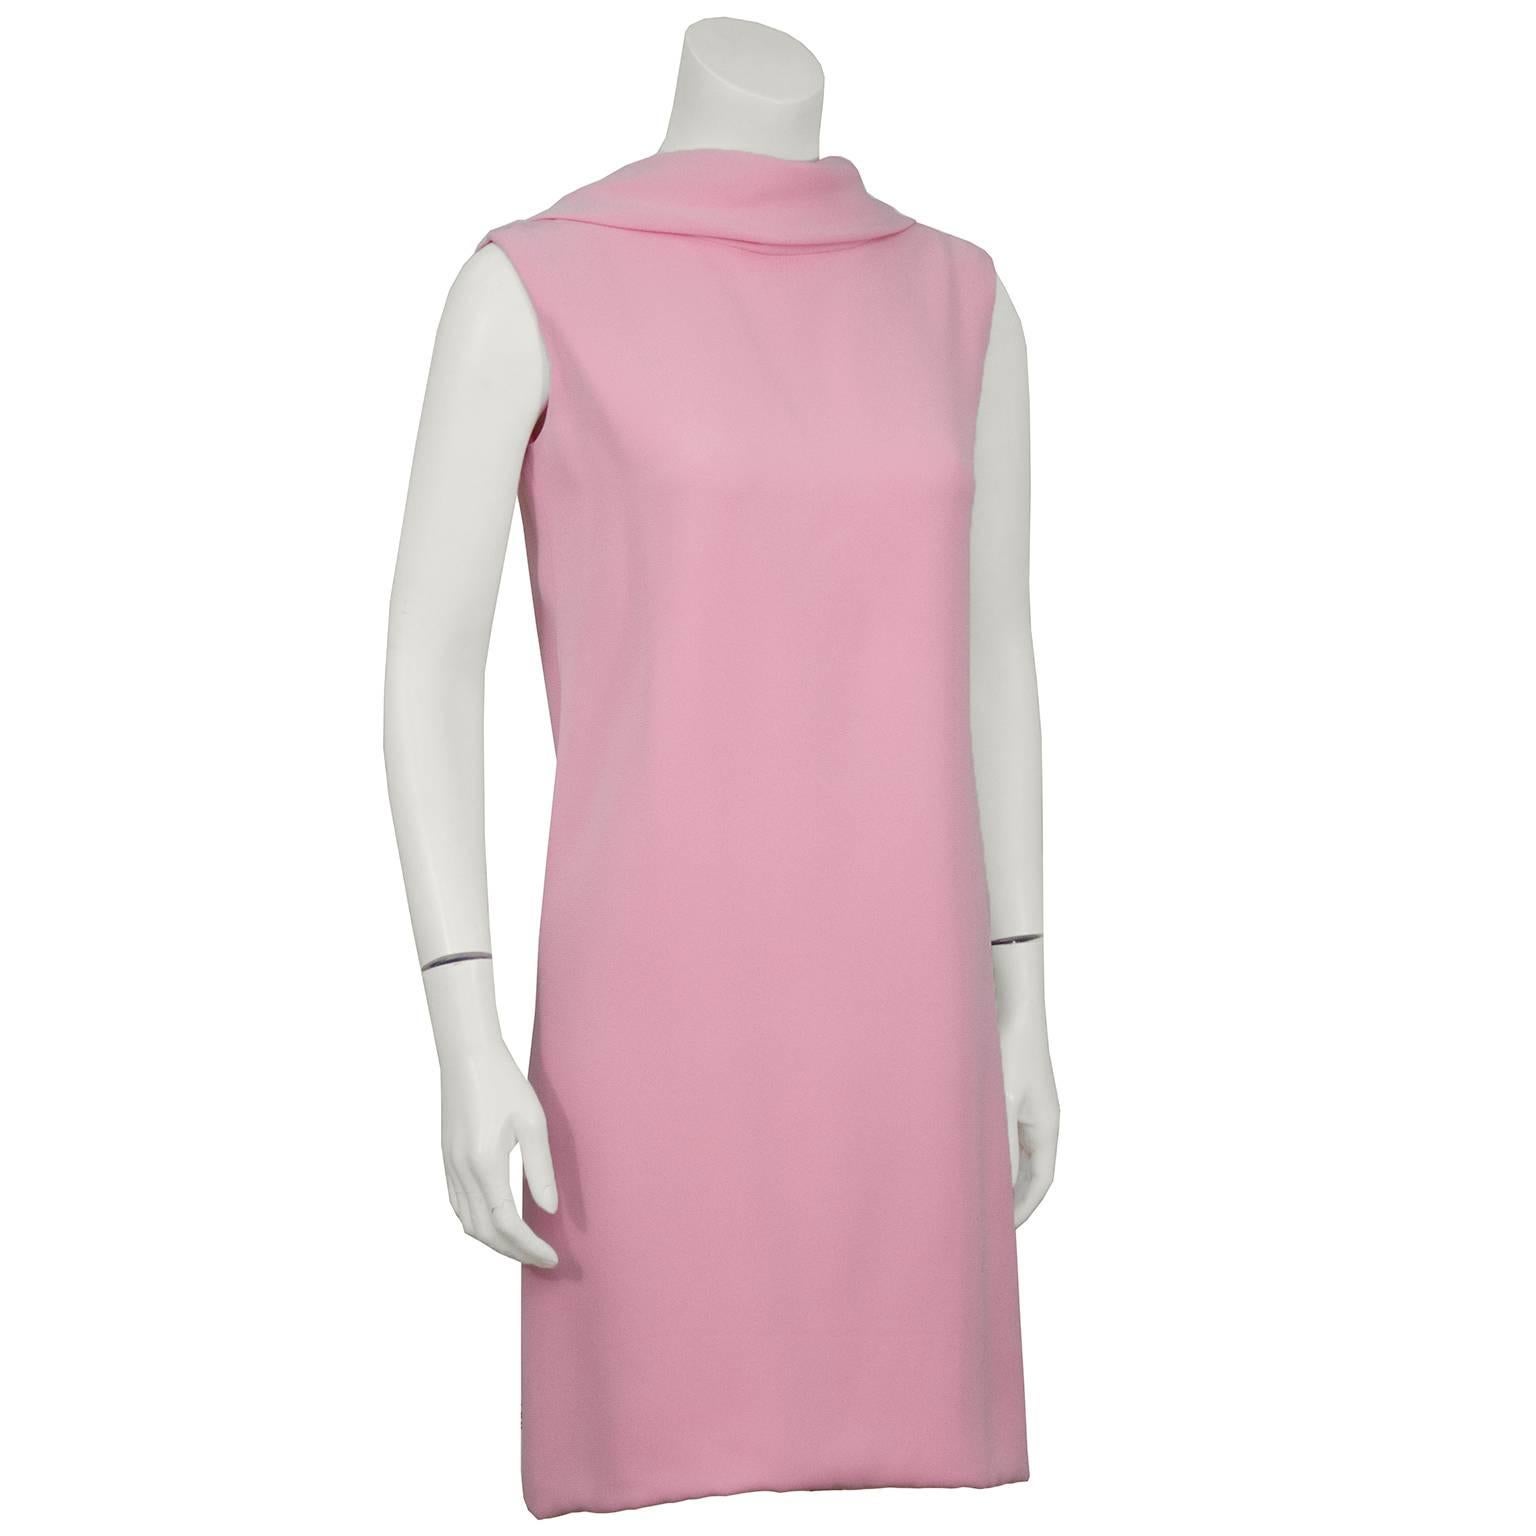 Baby pink Norell silk scoop back dress from the 1960's. The neckline is high in the front and dips low in the back. Folded collar and sleeveless, this dress is snug in the hips. In excellent condition, some minor fade to the fabric due to age. Fits